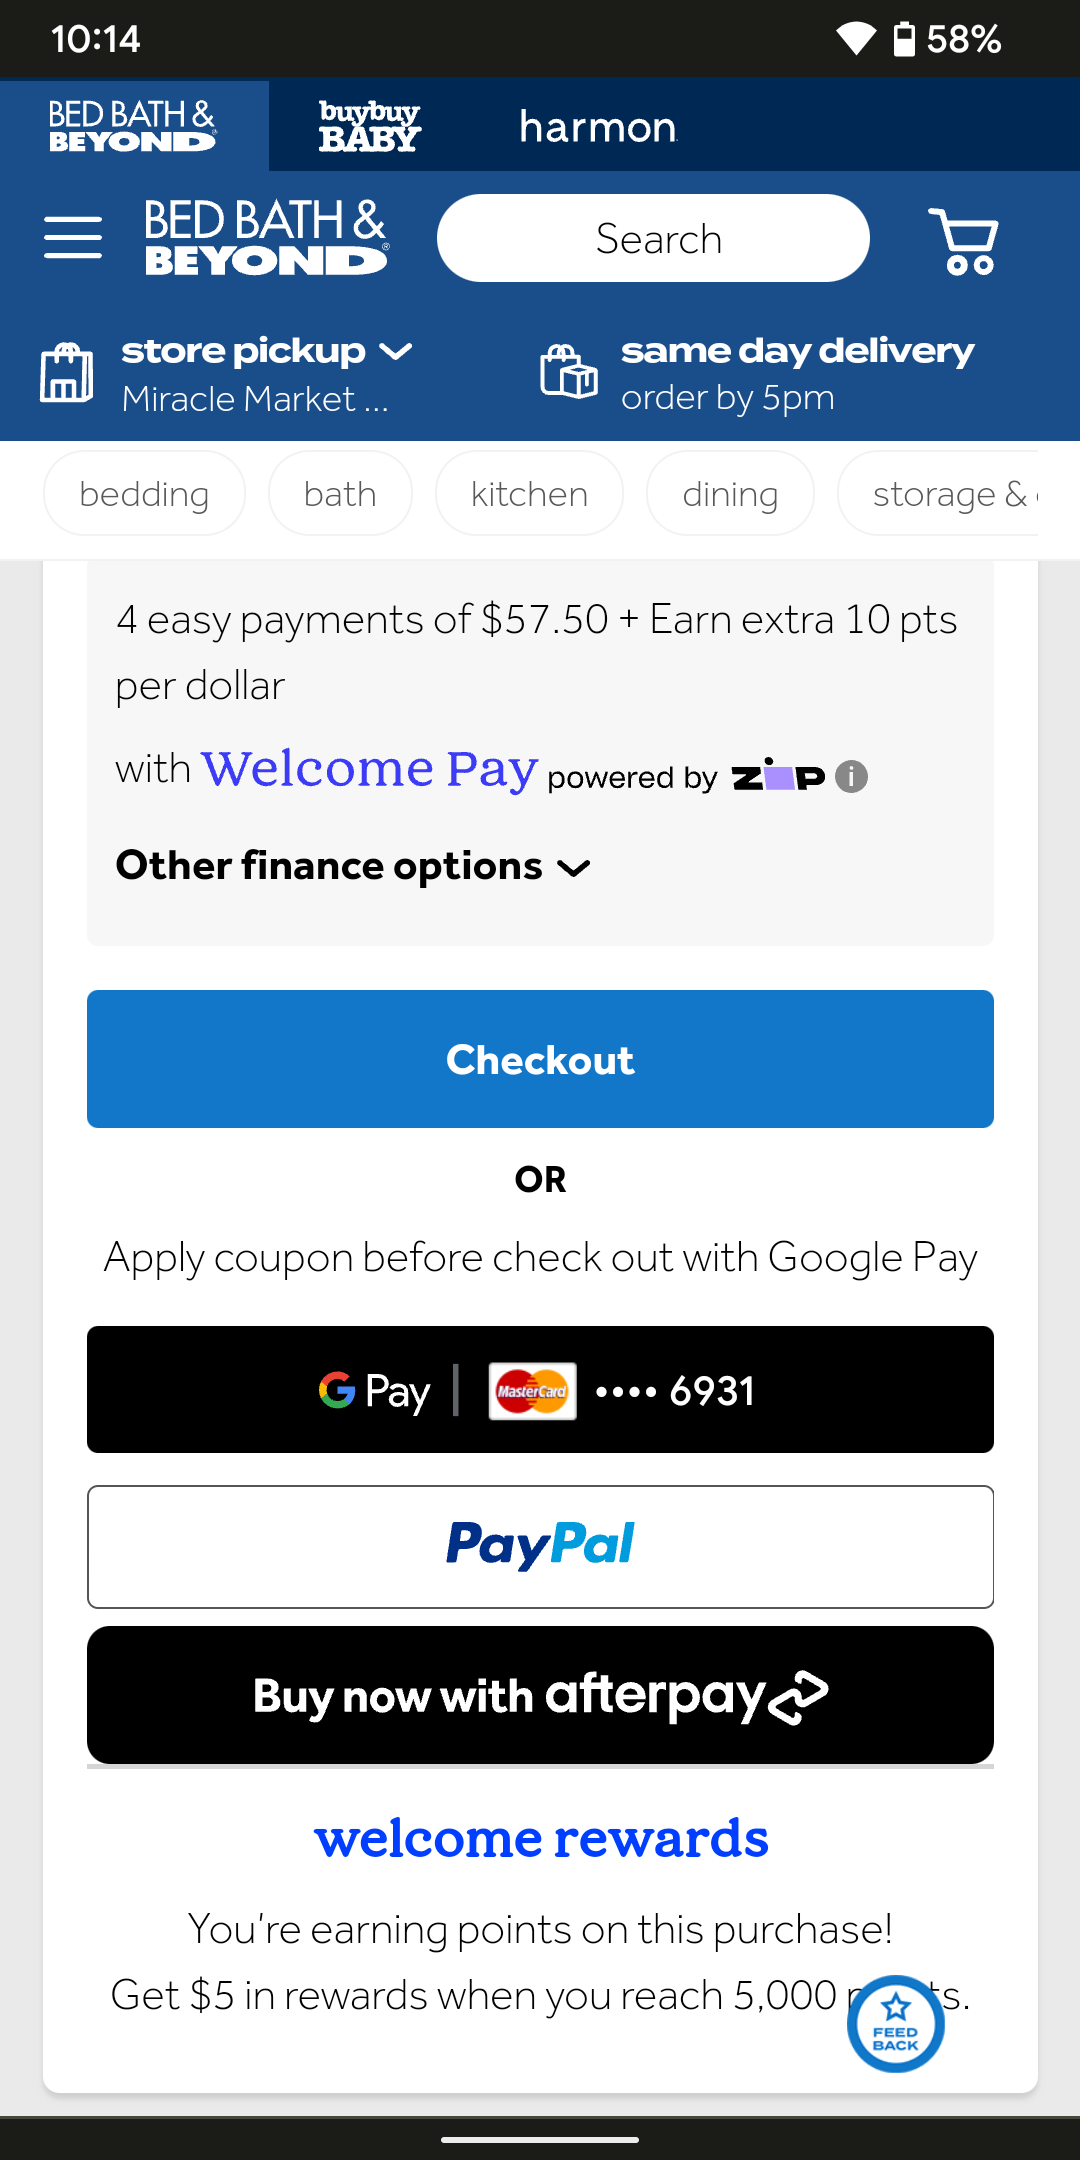 Bed Bath & Beyond accepts Google Pay on its website.